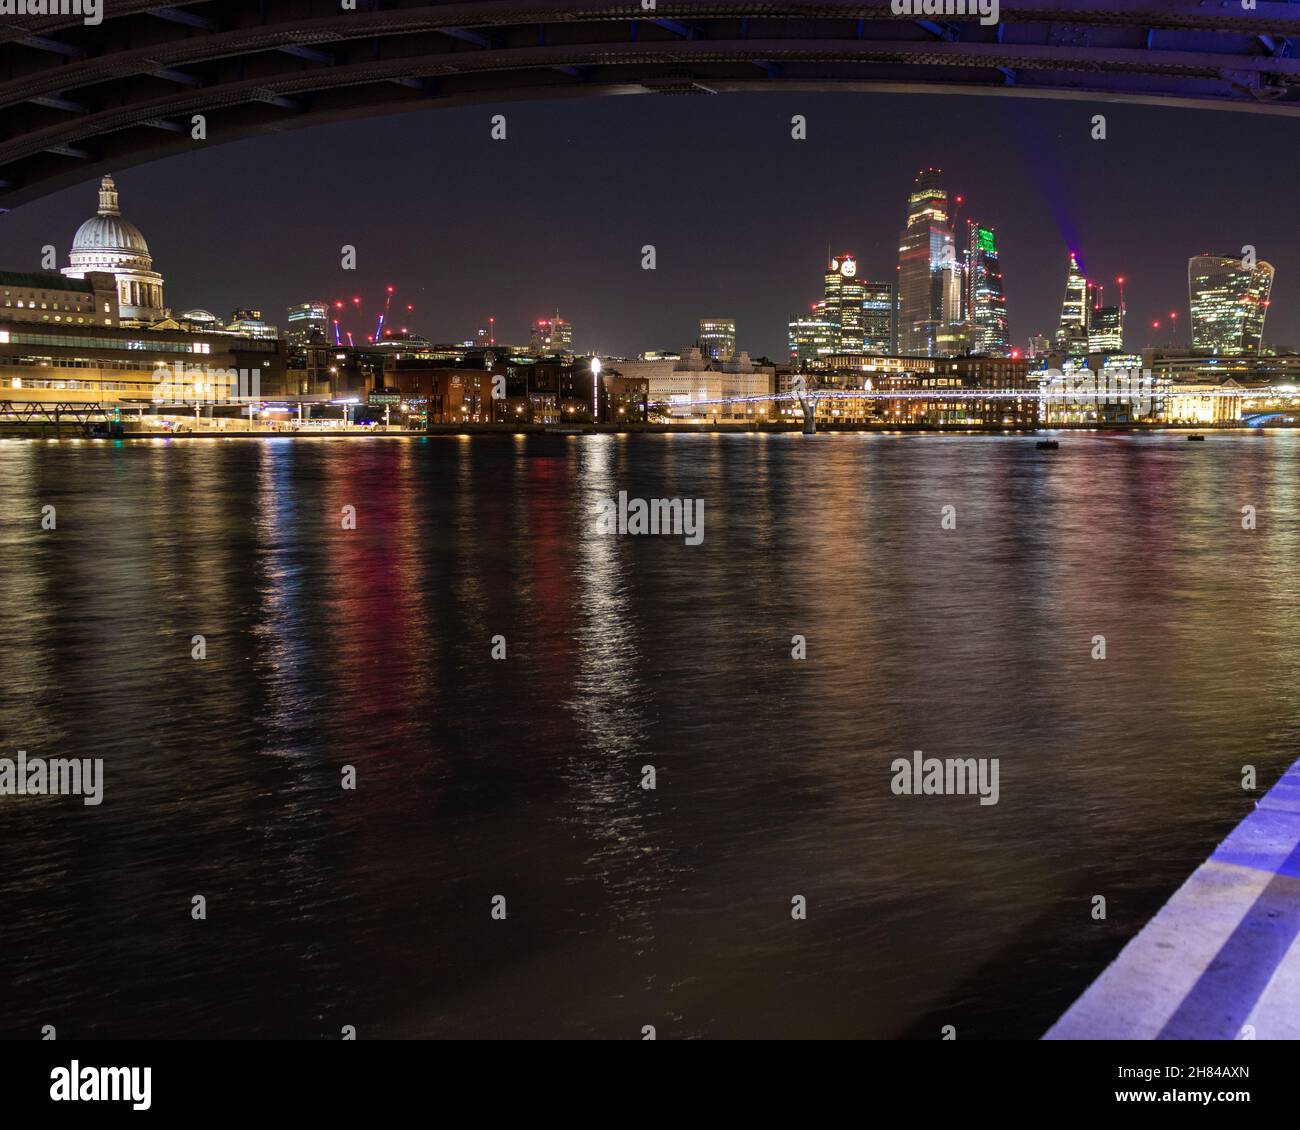 A view of the city of London skyline at night showing station Pauls cathedral, the wale talkie and the cheesgrater. Stock Photo